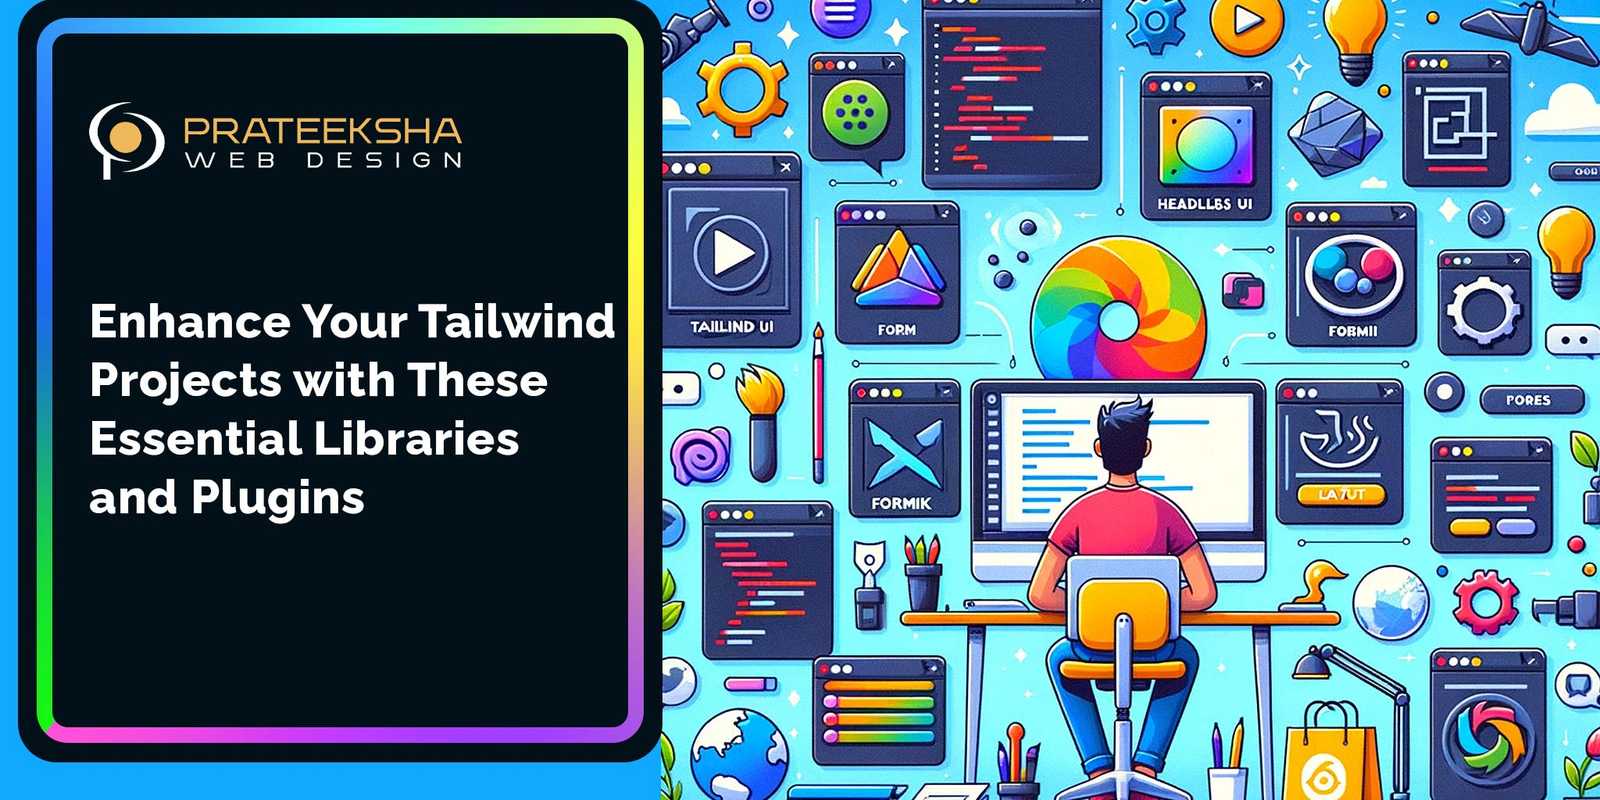 Enhance Your Tailwind Projects with These Essential Libraries and Plugins